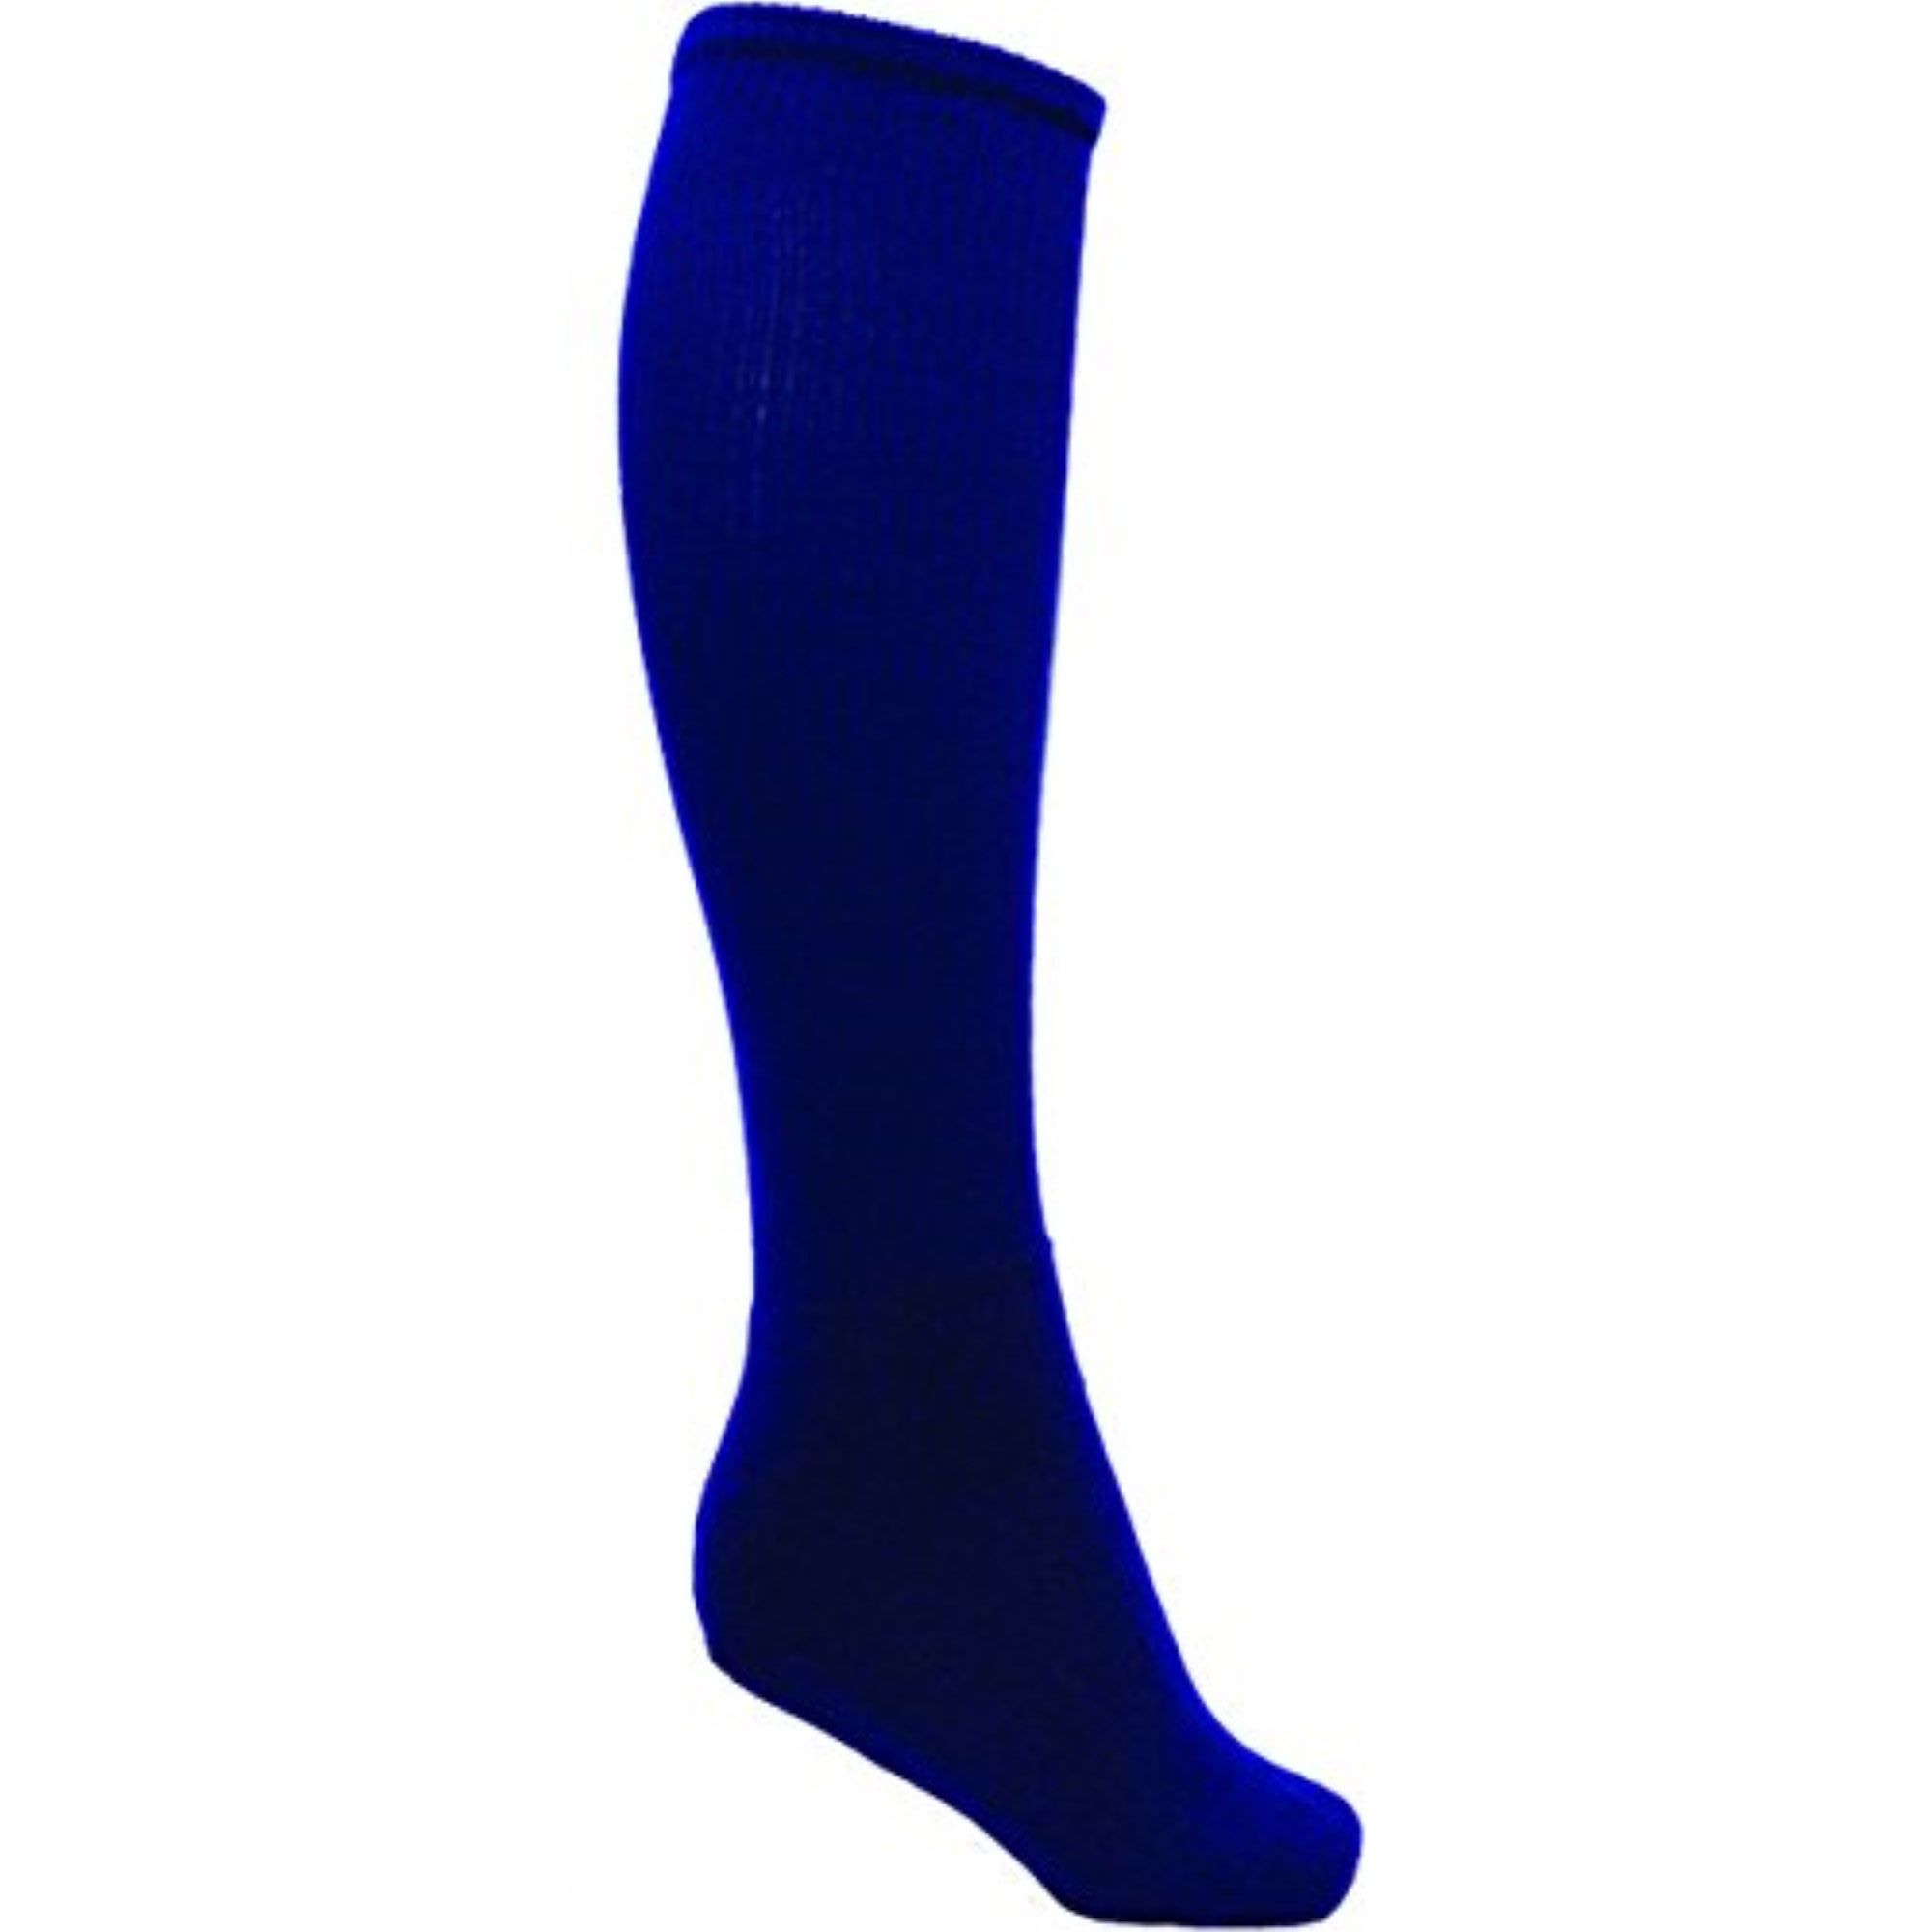 VIZARI League Soccer Tube Socks for Sport, Navy, Youth - Compression Tube Field Hockey Socks with Ergonomic Cushioning and Suppo